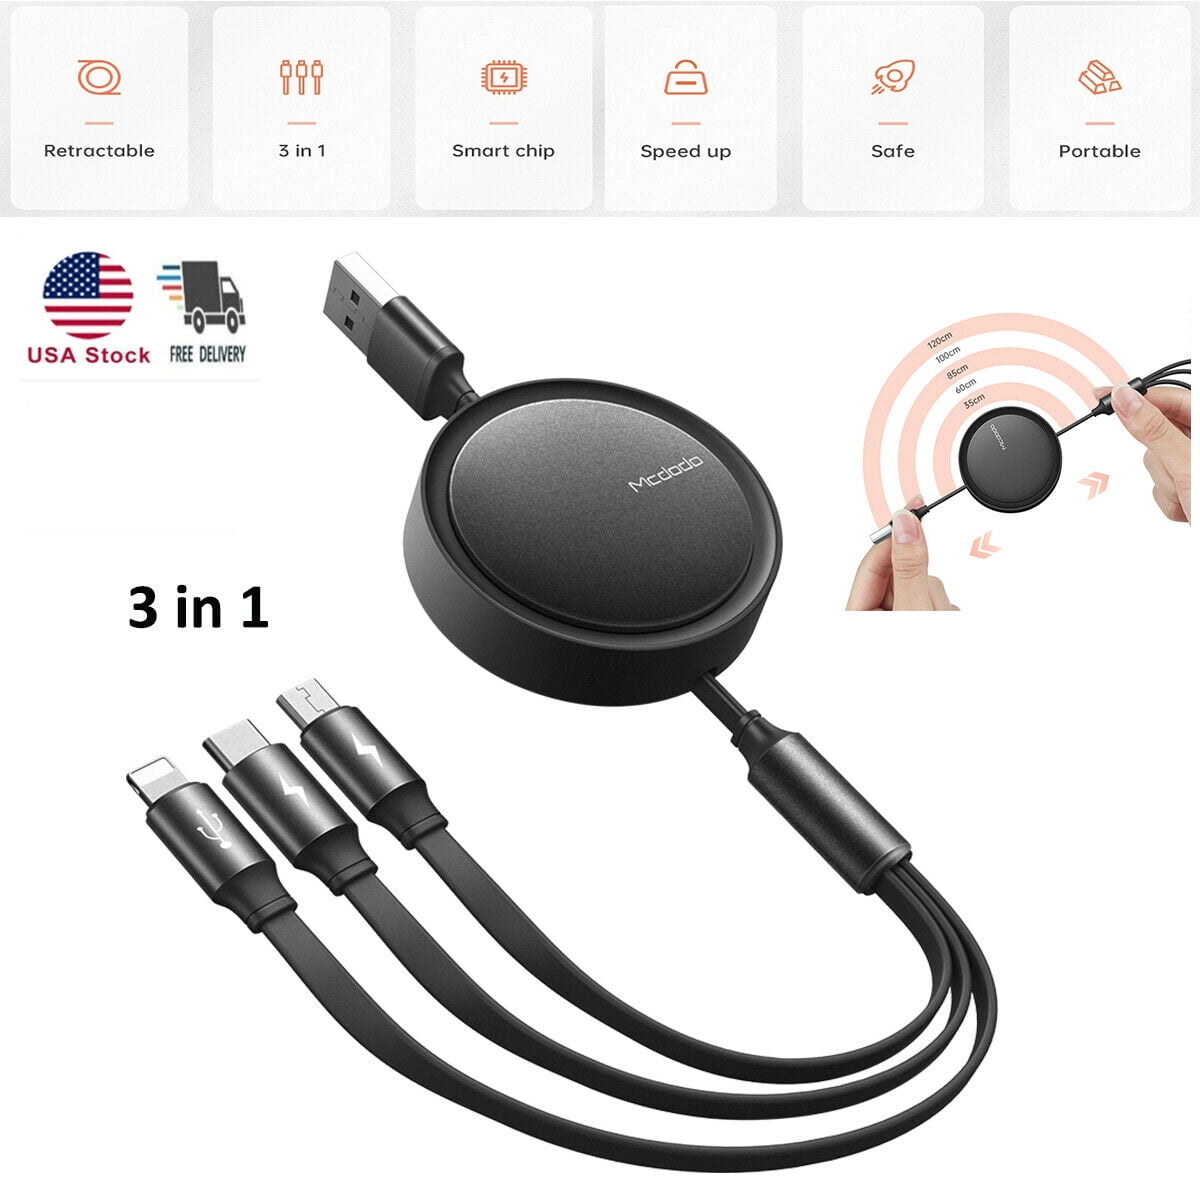 Android Charger USB Cable Art Painting Traditional Horse Multi 3 in 1 Retractable Fast Charging Multi Cable with Micro USB/Type C Compatible with Cell Phones Tablets and More 